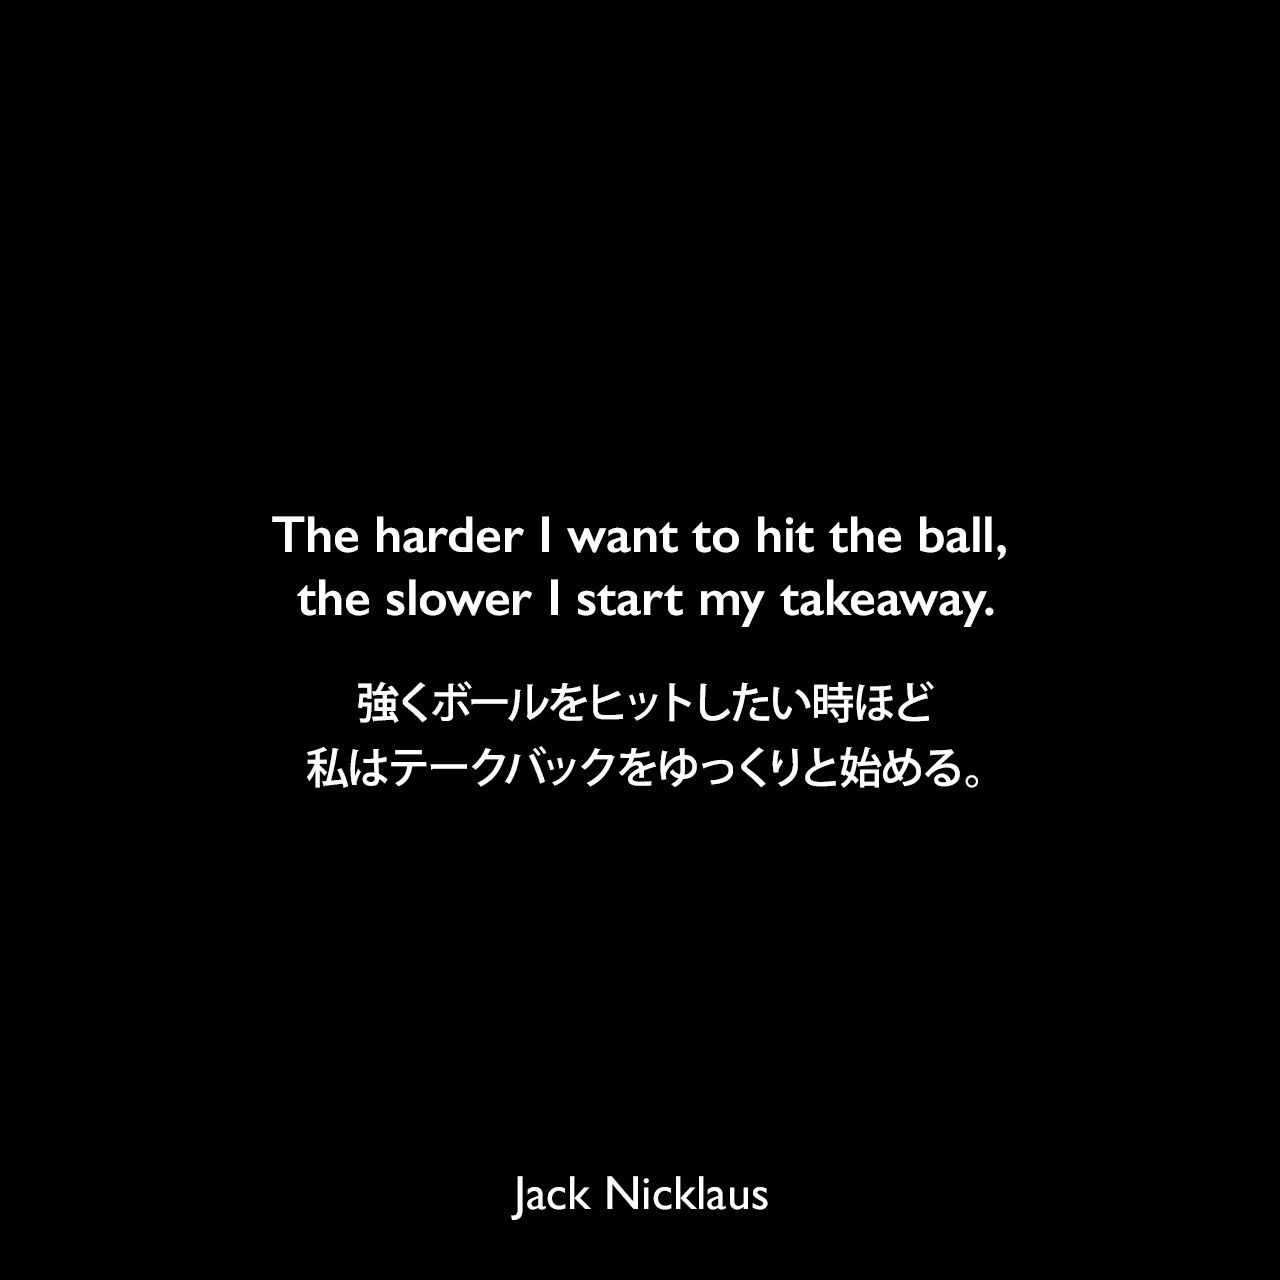 The harder I want to hit the ball, the slower I start my takeaway.強くボールをヒットしたい時ほど、私はテークバックをゆっくりと始める。Jack Nicklaus